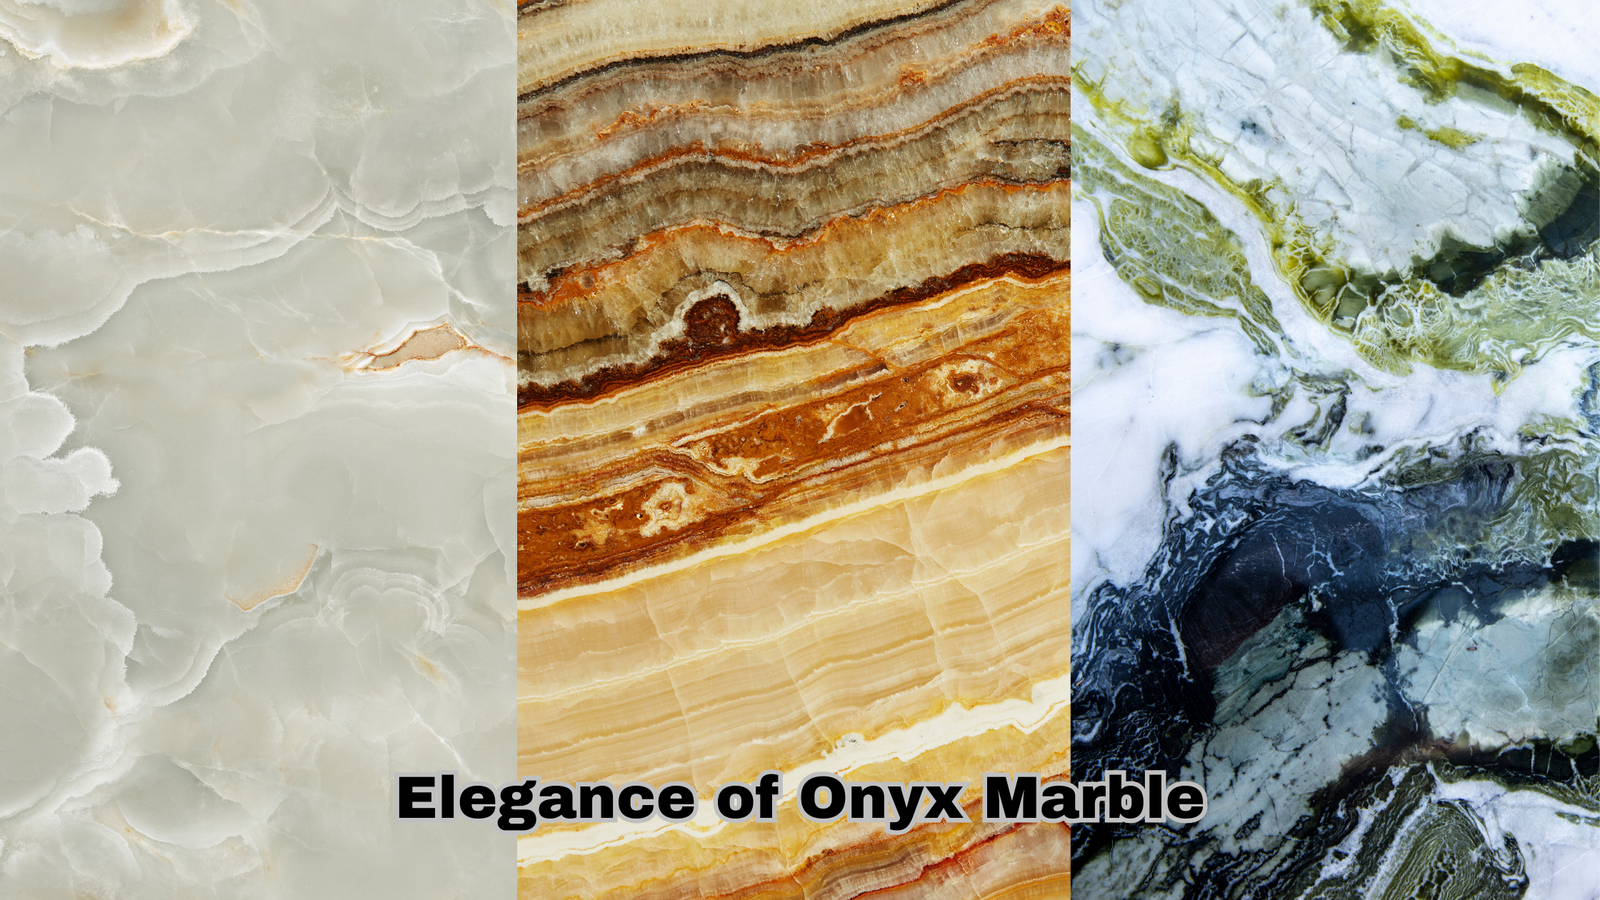 Exploring the Elegance of Onyx Marble in India